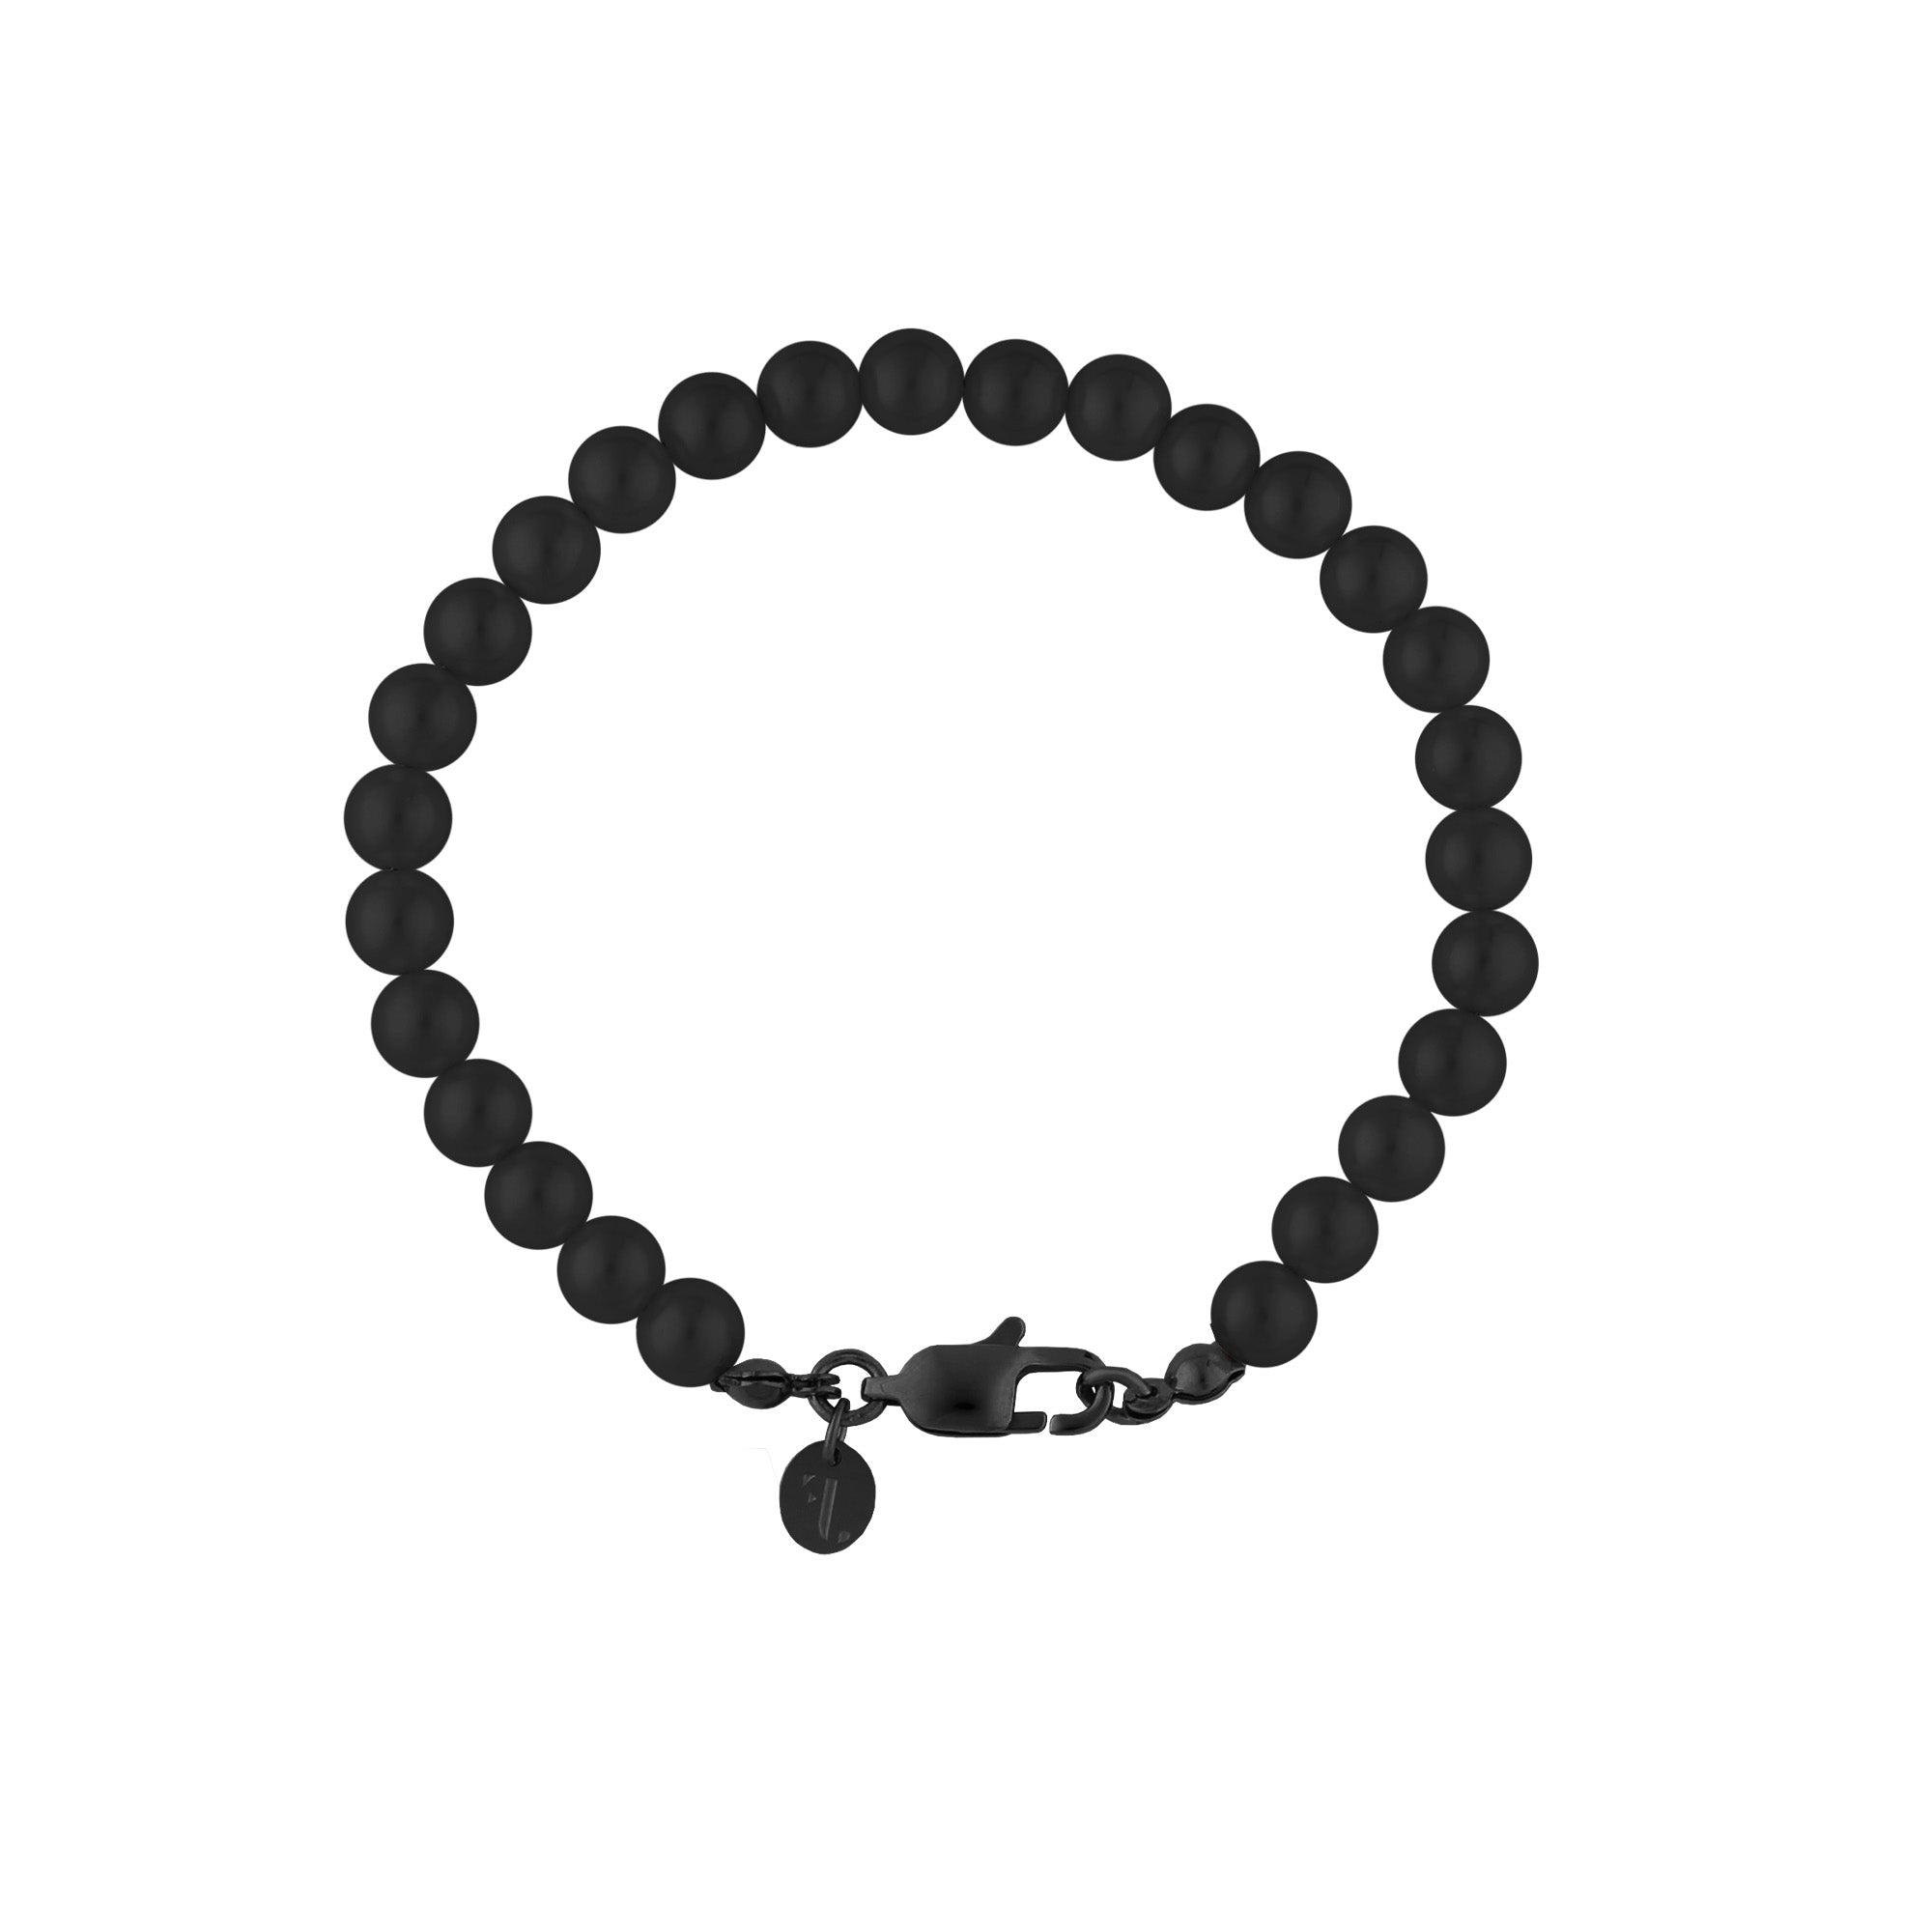 Dark Var men's bracelet by Five Jwlry, crafted with black onyx beads and a black stainless steel buckle. Available in sizes 20cm and 22cm. Made from water-resistant 316L stainless steel. Hypoallergenic with a 2-year warranty.